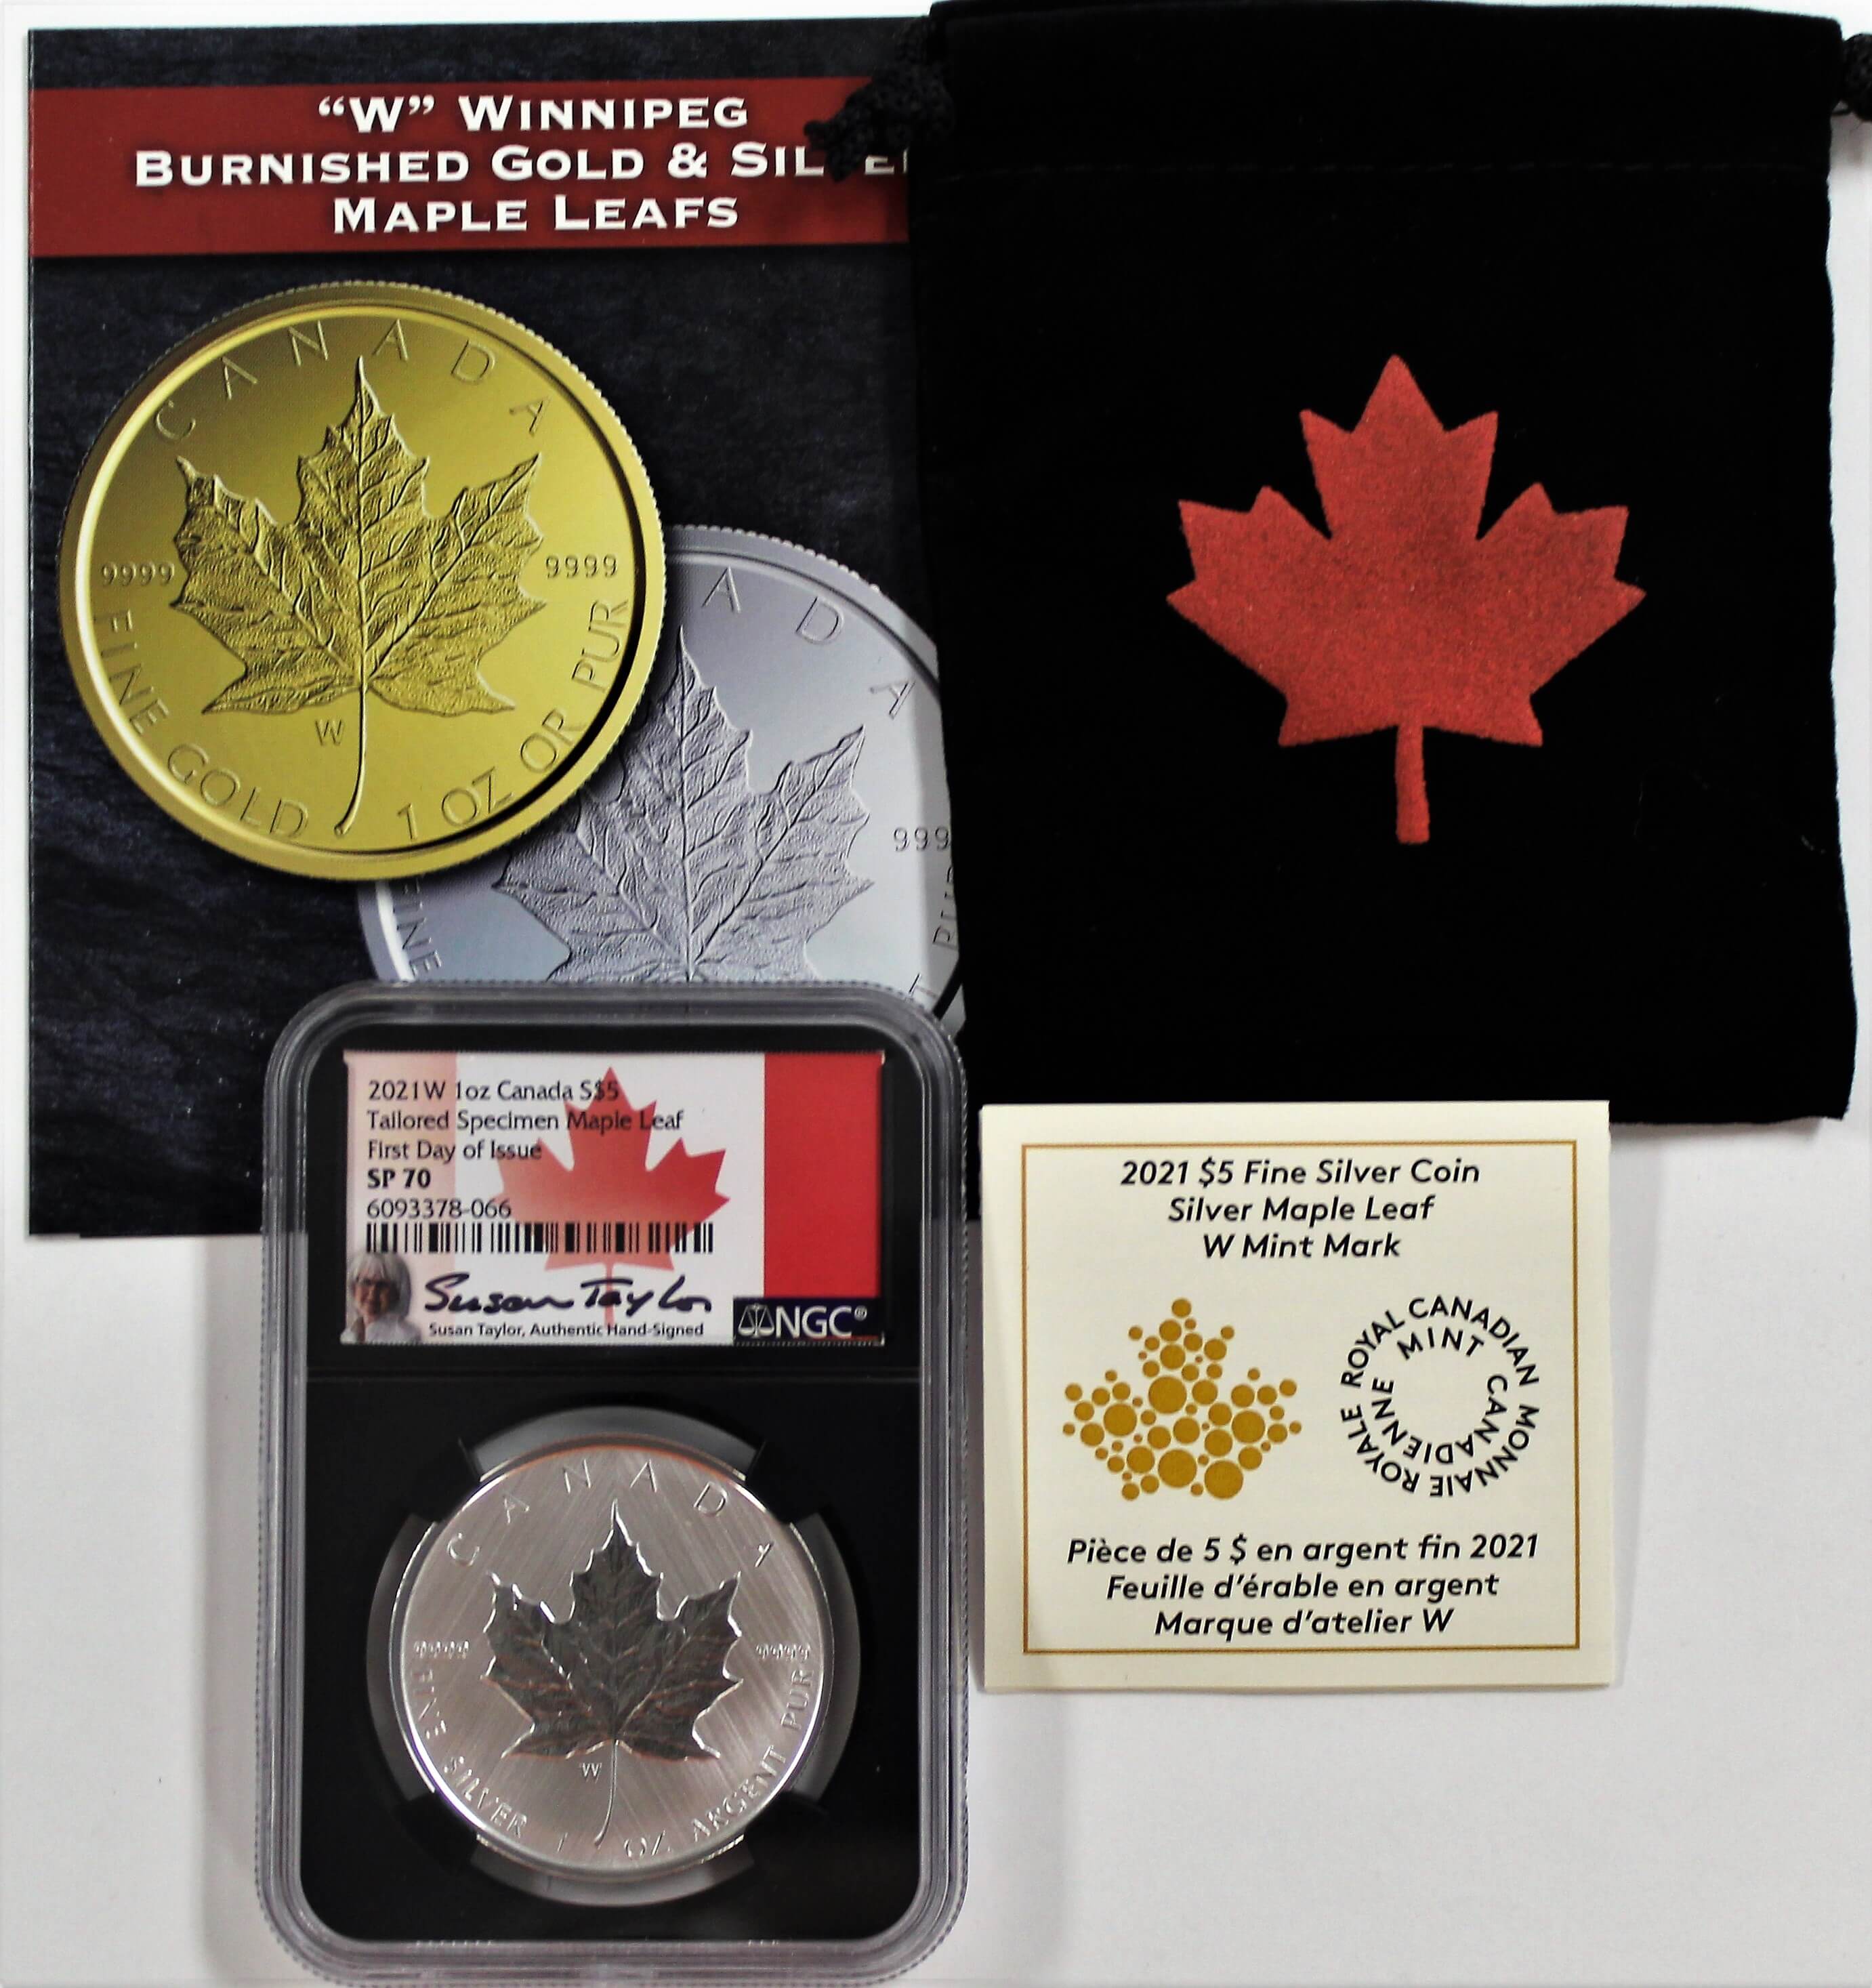 2021 W Canada $5 1 oz Silver Maple Leaf Tailored Specimen NGC SP70 First Day of Issue Susan Taylor Signed